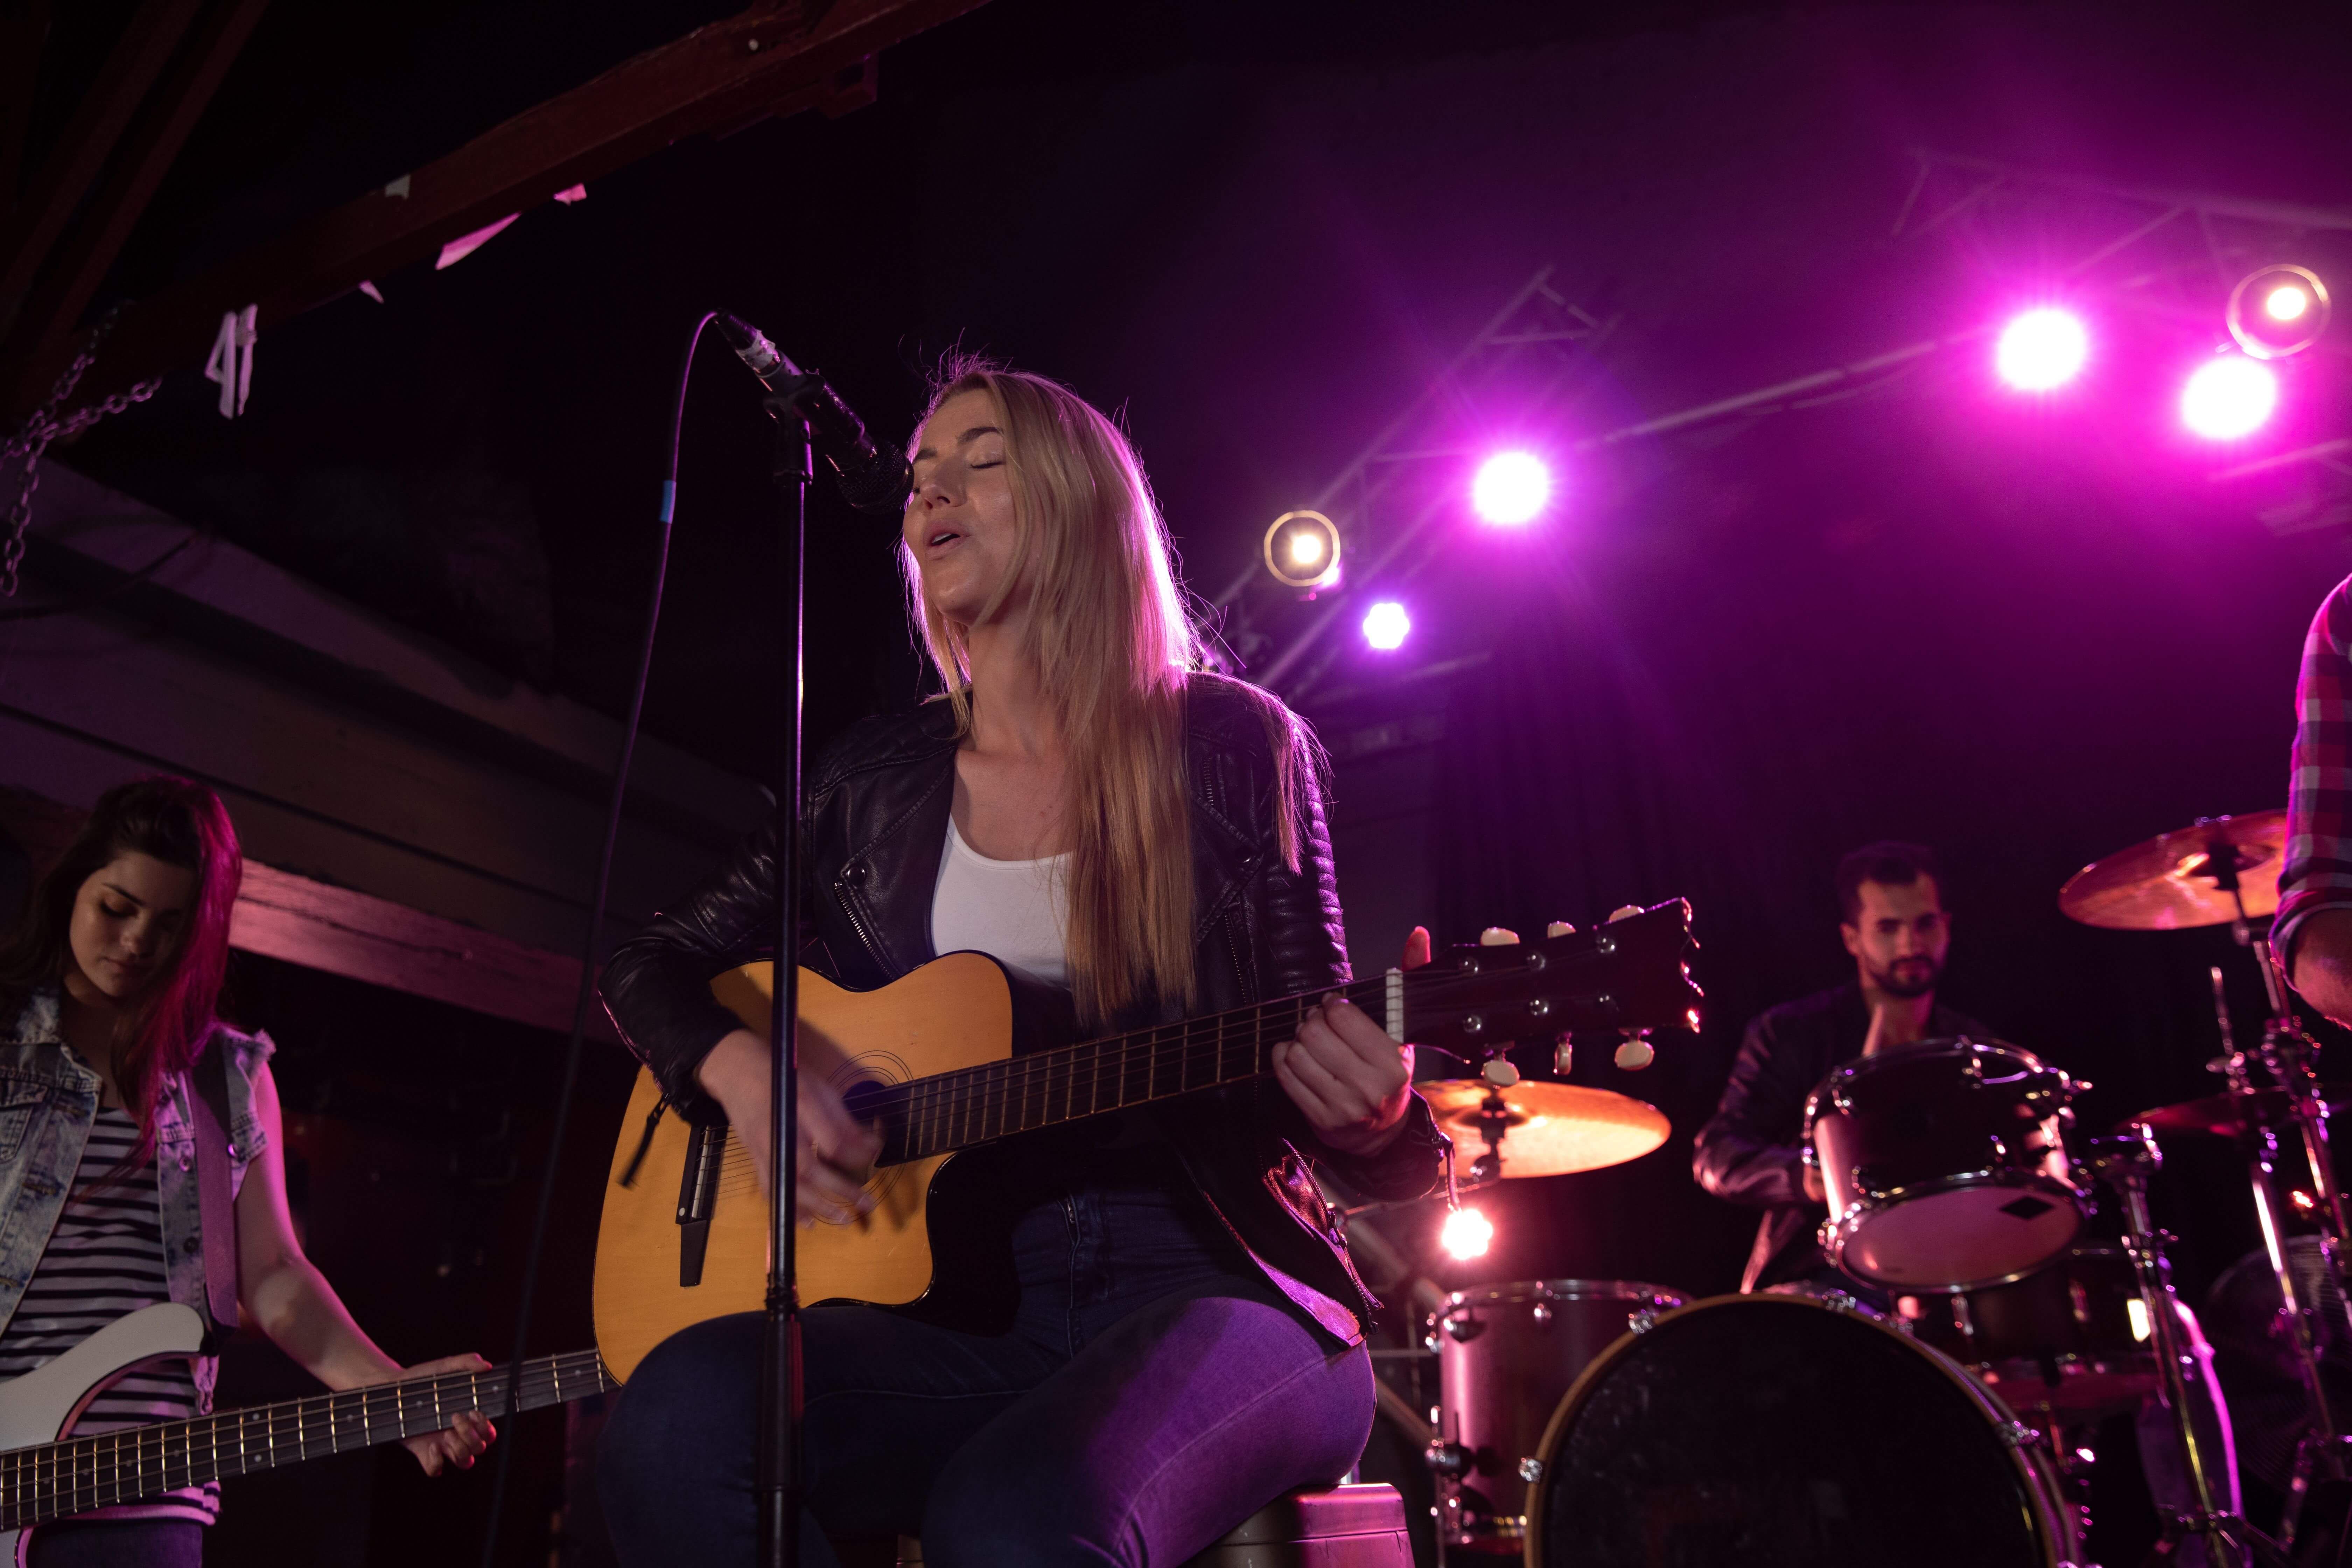 Female singer performs at acoustic set - 7 top marketing strategies for musicians - Image